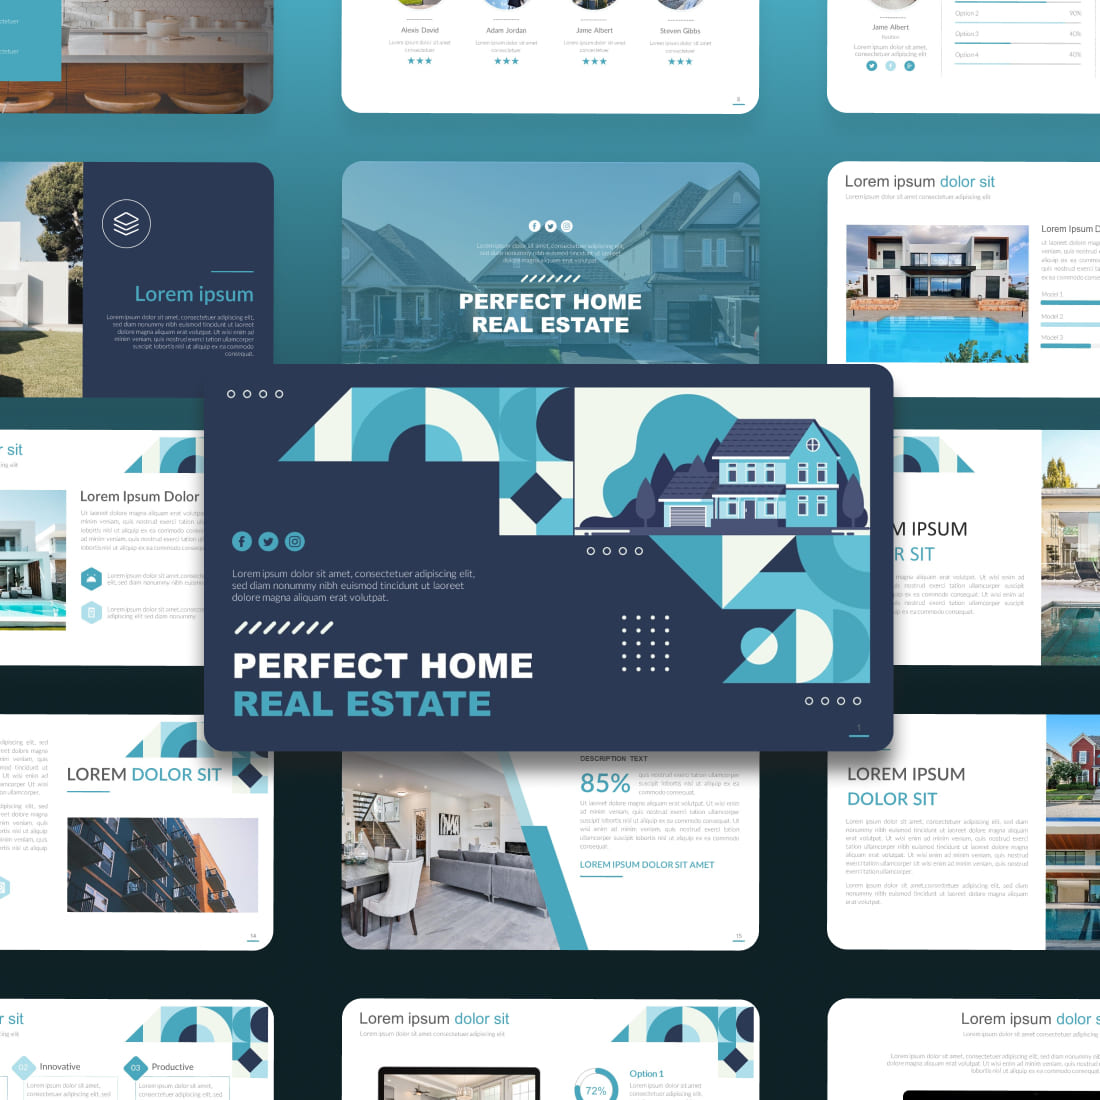 Perfect Home Real Estate Presentation Template cover.